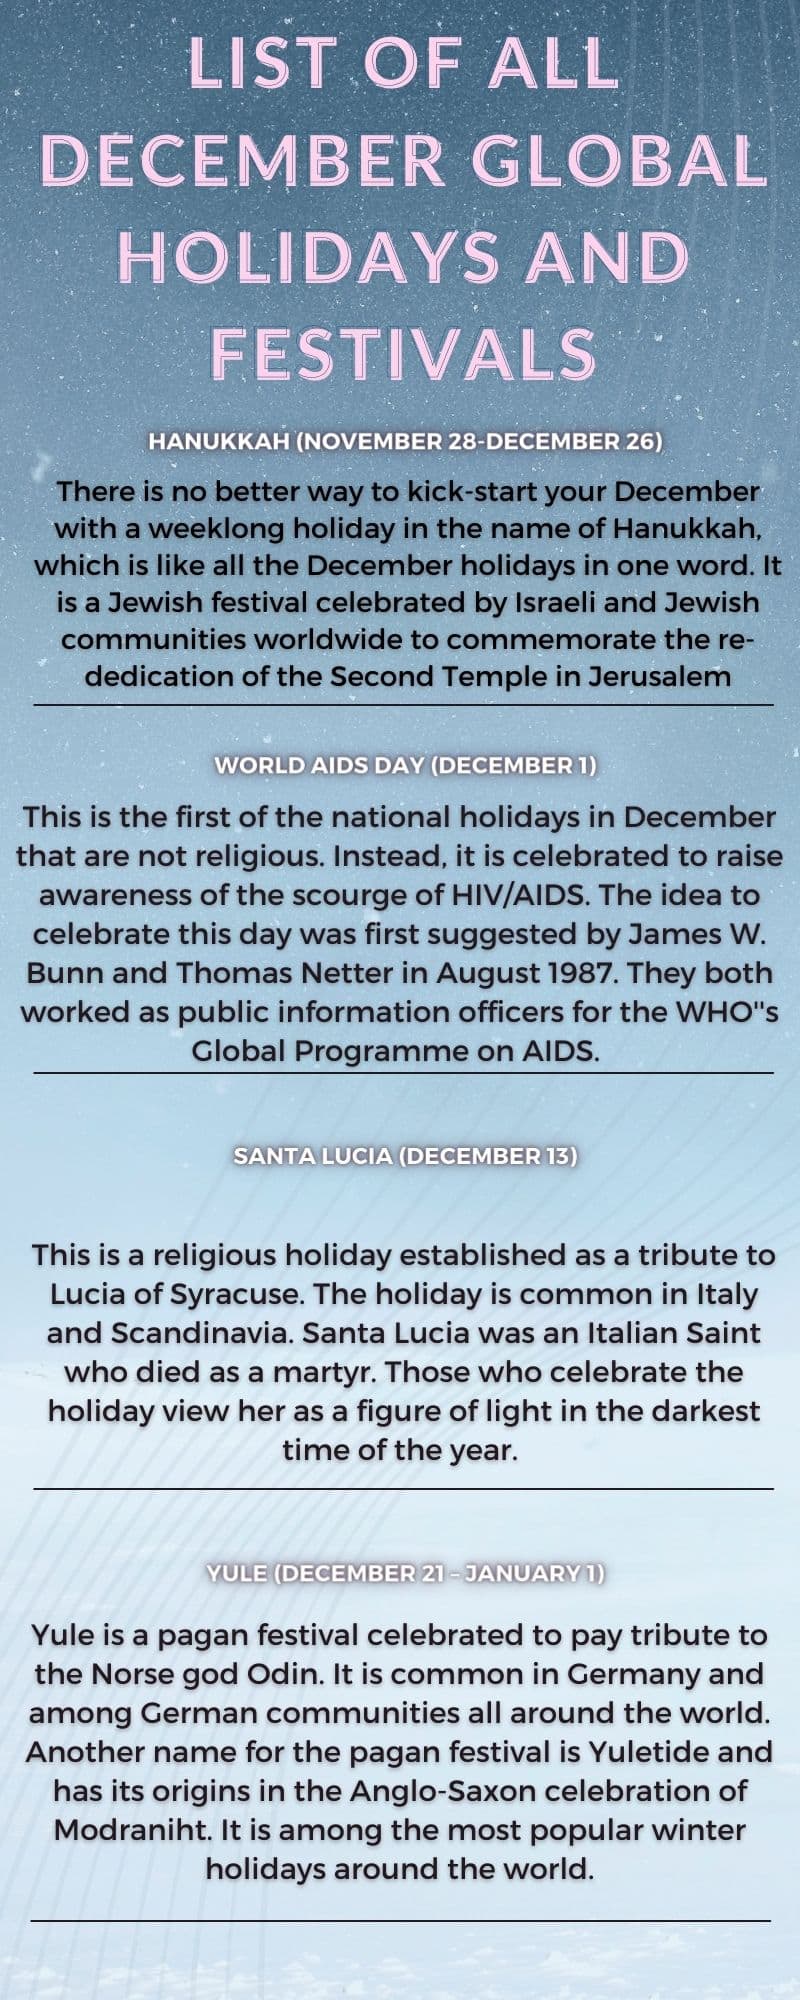 Global holidays and festivals